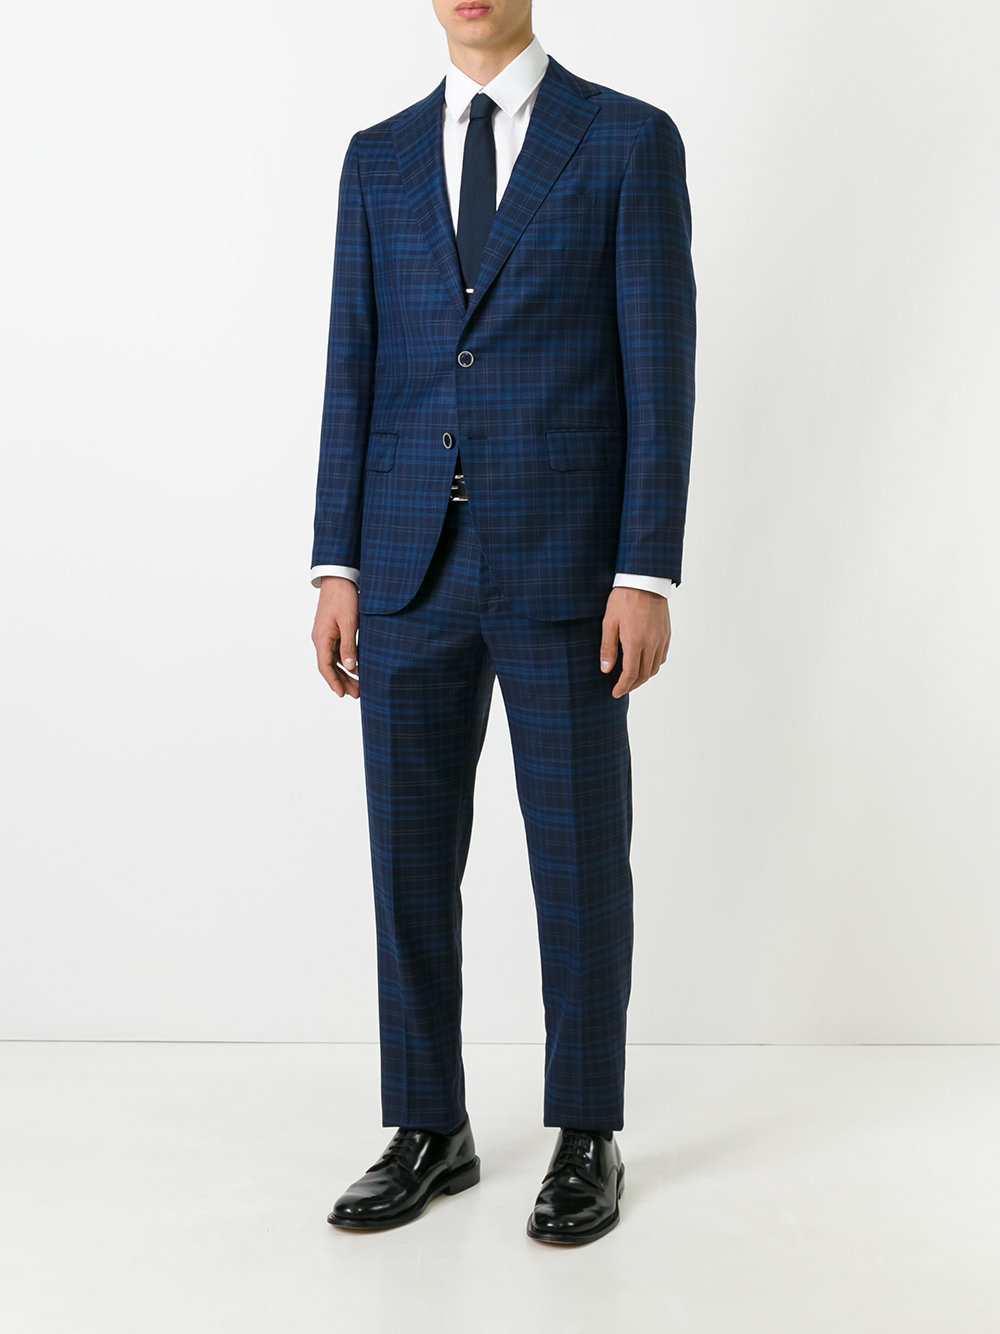 Men's Two Piece Blue Plaid Suit, Casual Business Style, Giorgenti Custom  Suit BK NYC